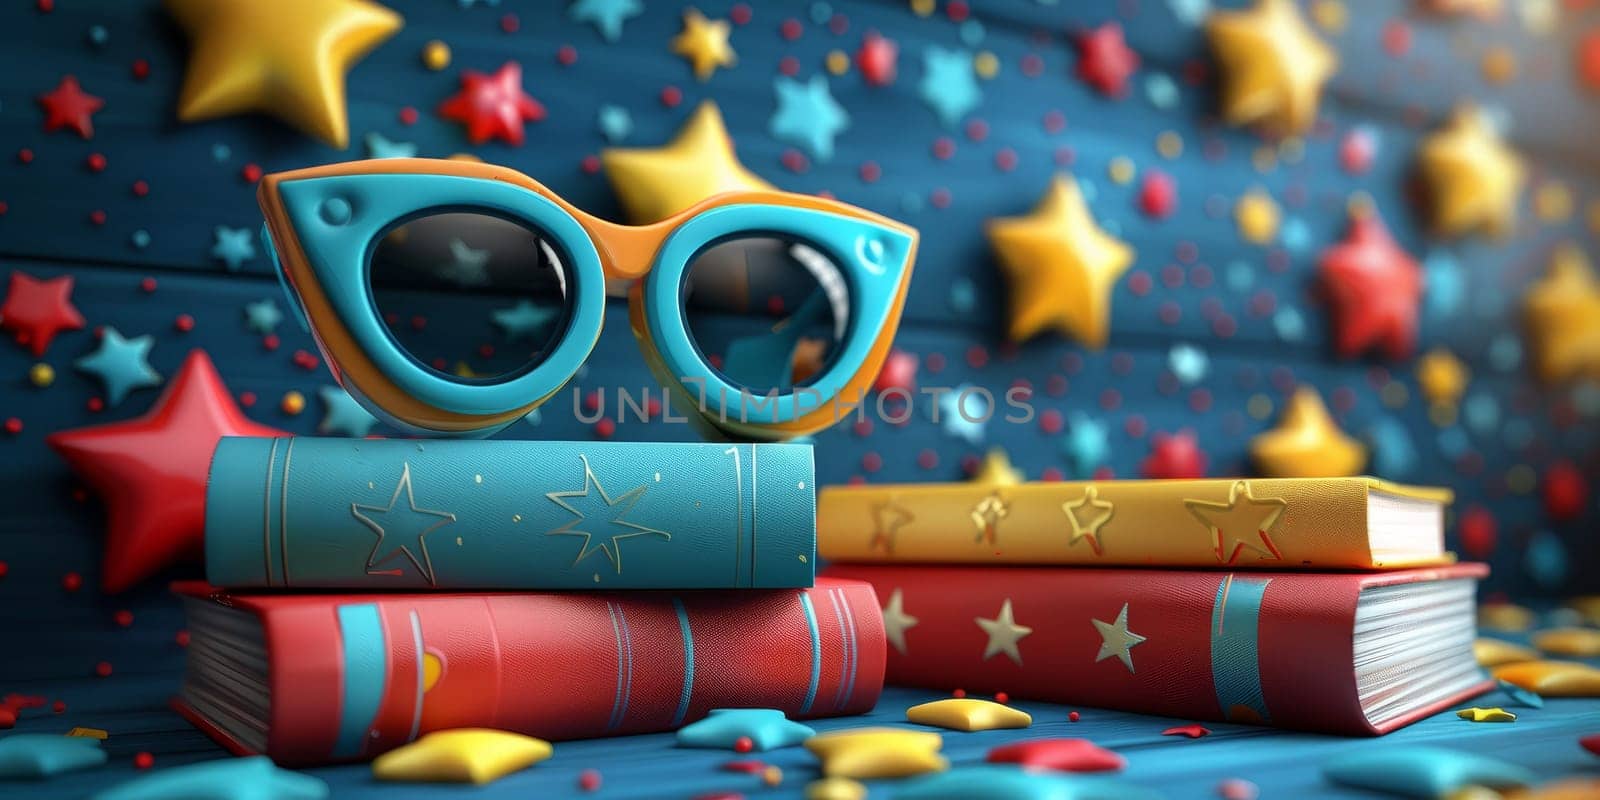 Fun and Whimsical Reading Glasses with Stacked Books on Colorful Star Background. Concept of Imagination, Creativity, and Escapism through Literature. by ailike